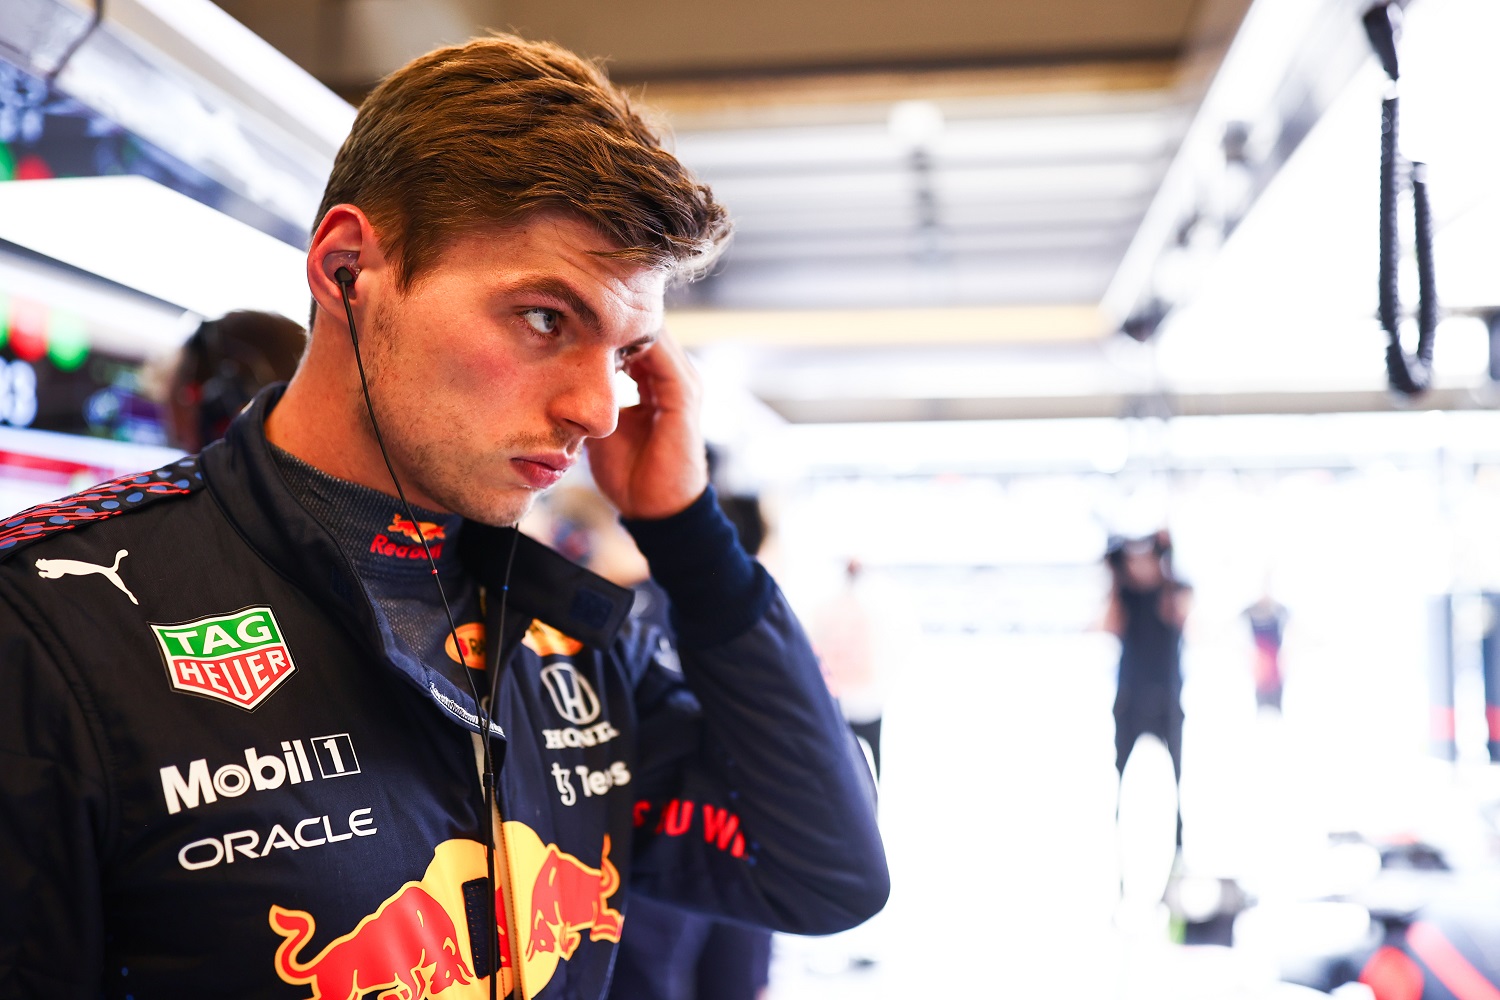 Max Verstappen of the Netherlands and Red Bull Racing prepares in the garage during practice ahead of the Formula 1 U.S. Grand Prix at Circuit of The Americas on Oct. 22, 2021 in Austin, Texas.